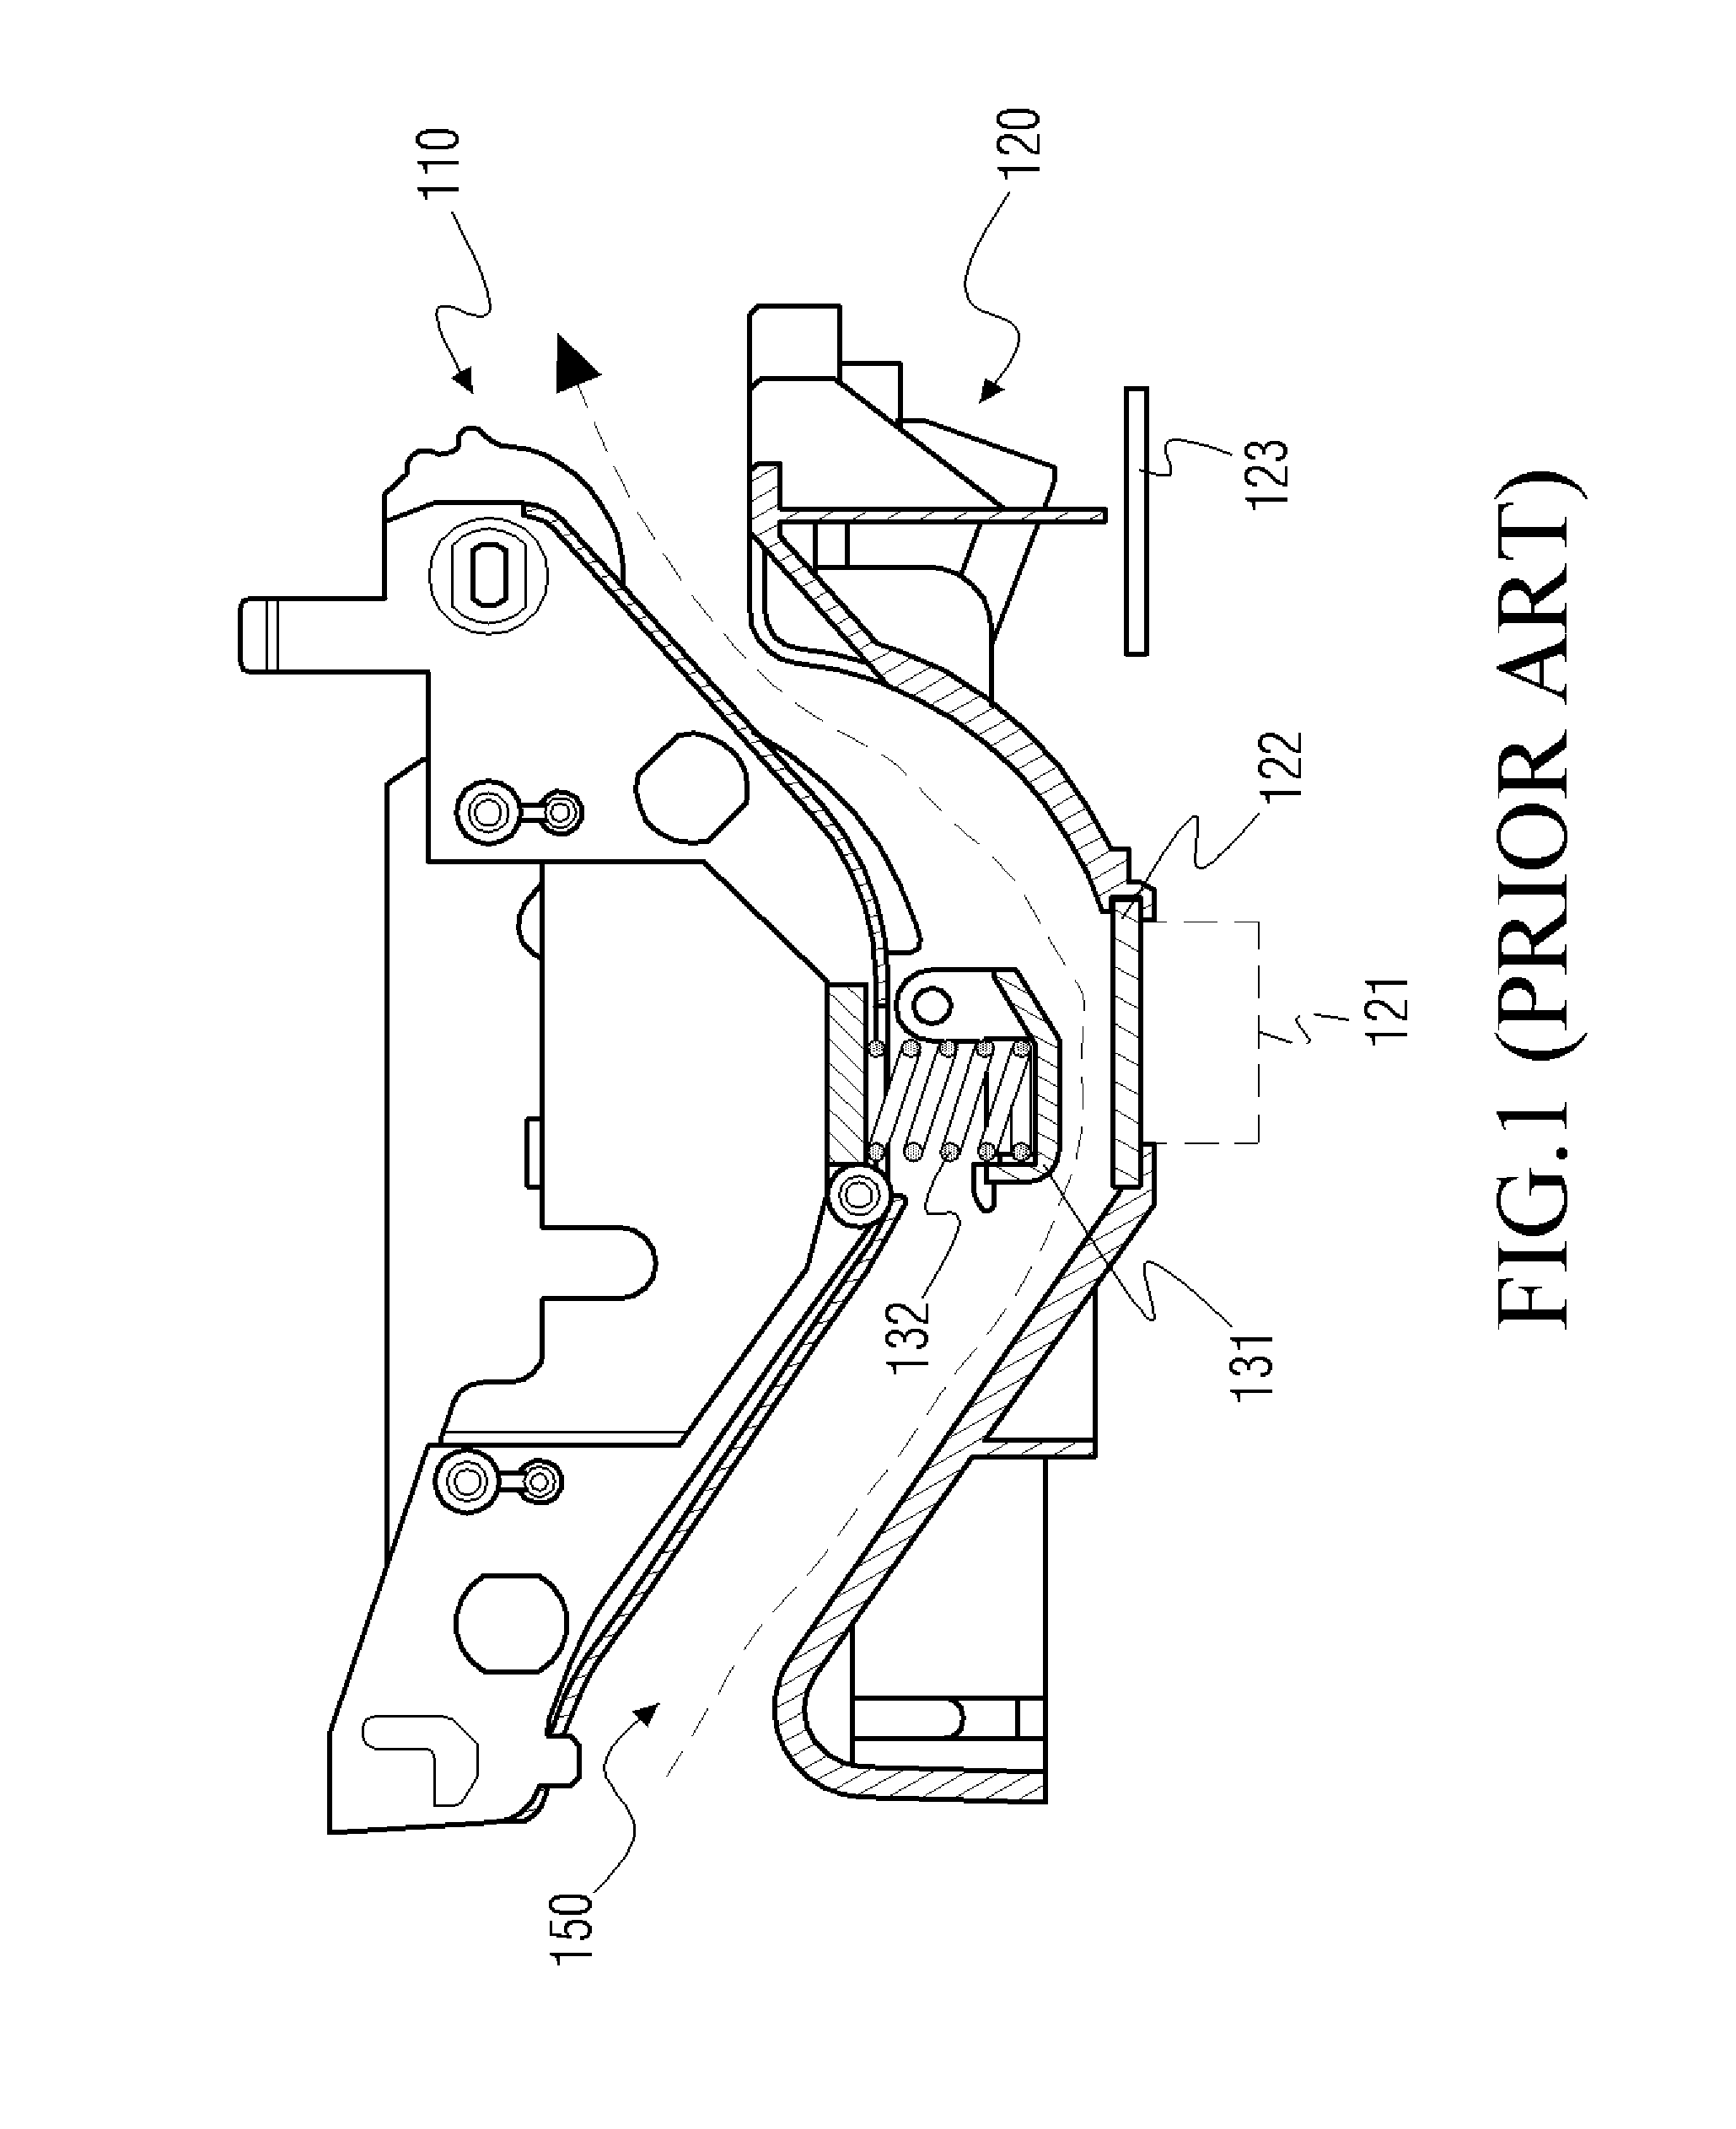 Paper pressing device for a scanning apparatus